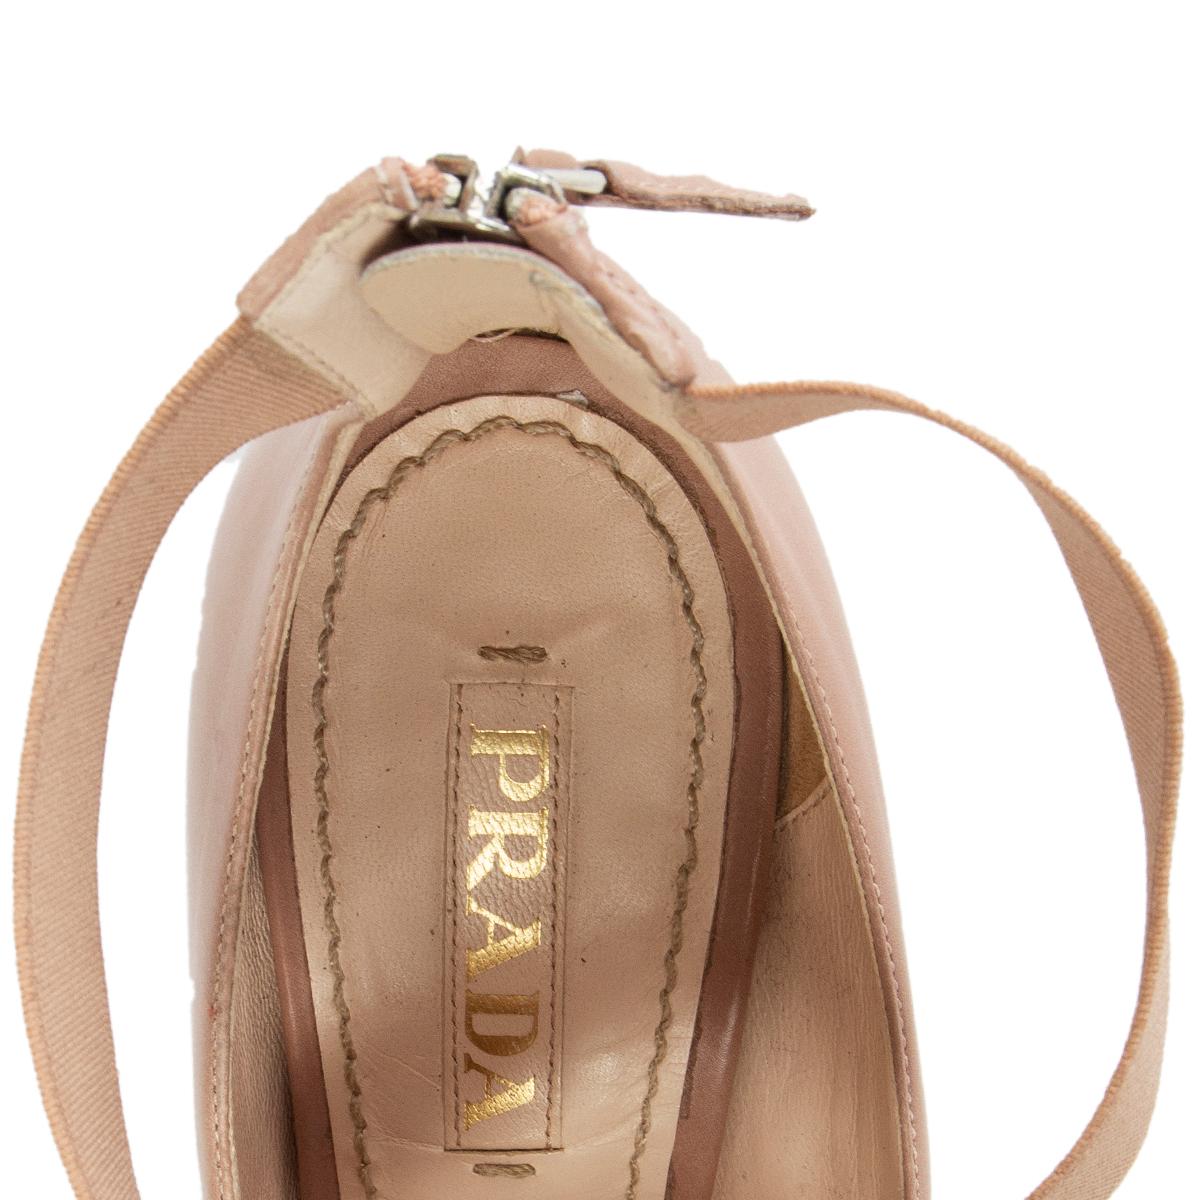 PRADA nude leather BALLET STYLE Pumps Shoes 37.5 For Sale 1